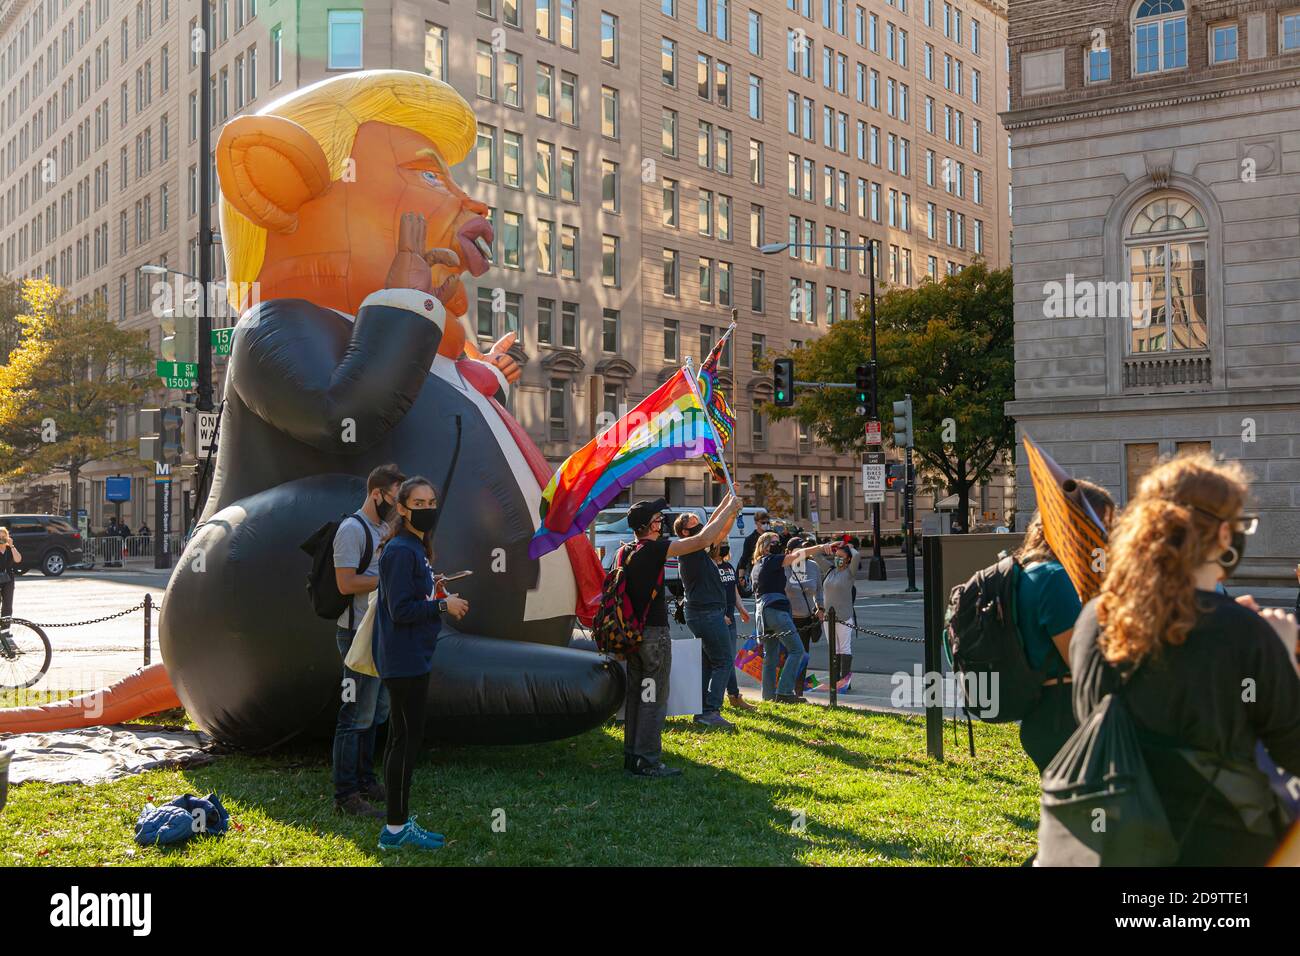 Washington DC, USA 11/06/2020: Protesters near White house following defeat of Donald Trump in US Elections. They gather around a giant funny mascot o Stock Photo